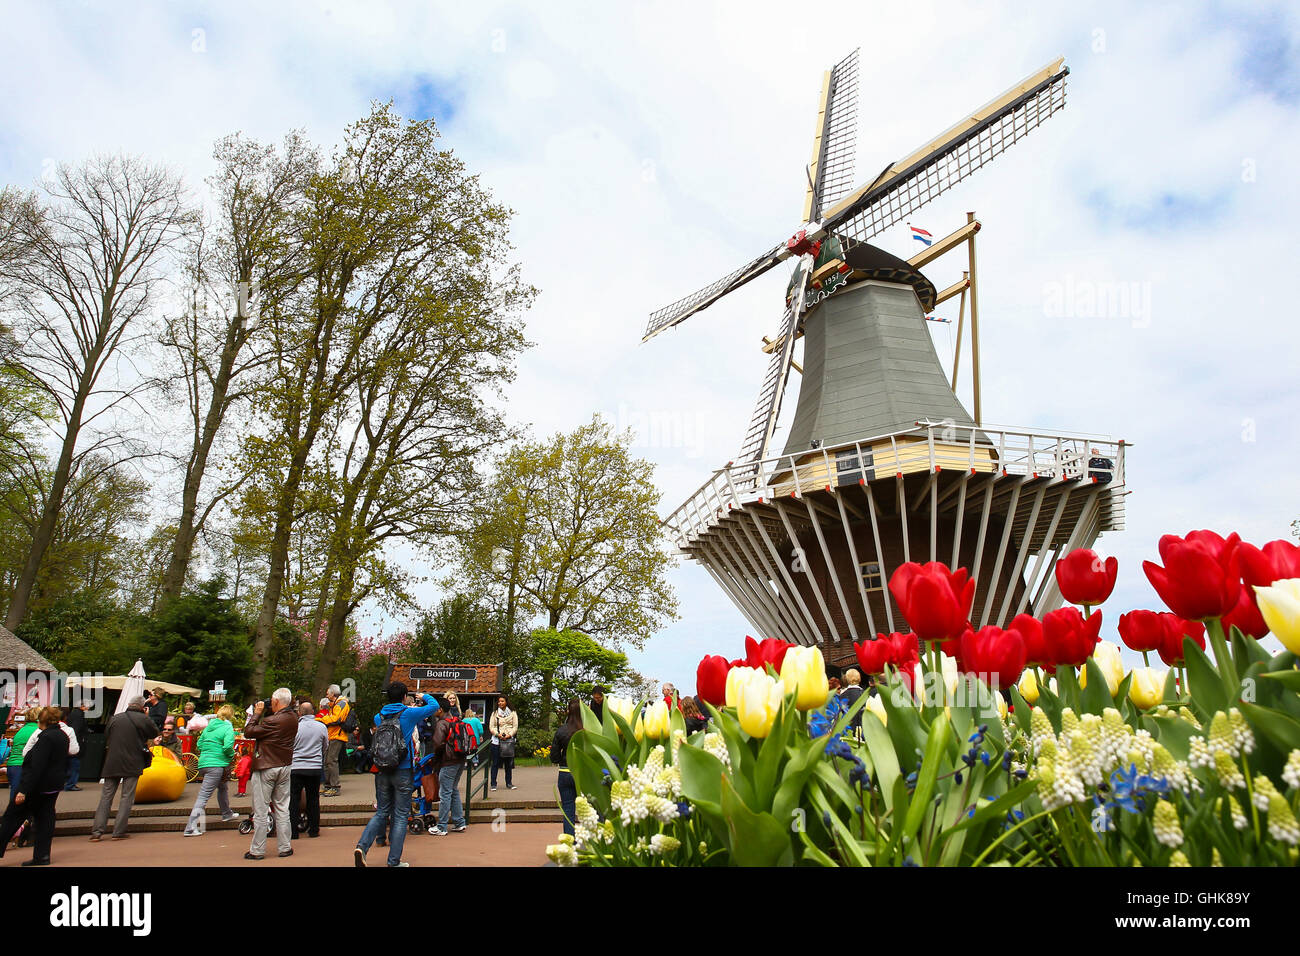 Tourists enjoy the flowers and windmill at the dutch spring flower garden Keukenhof in Lisse, Holland. Stock Photo